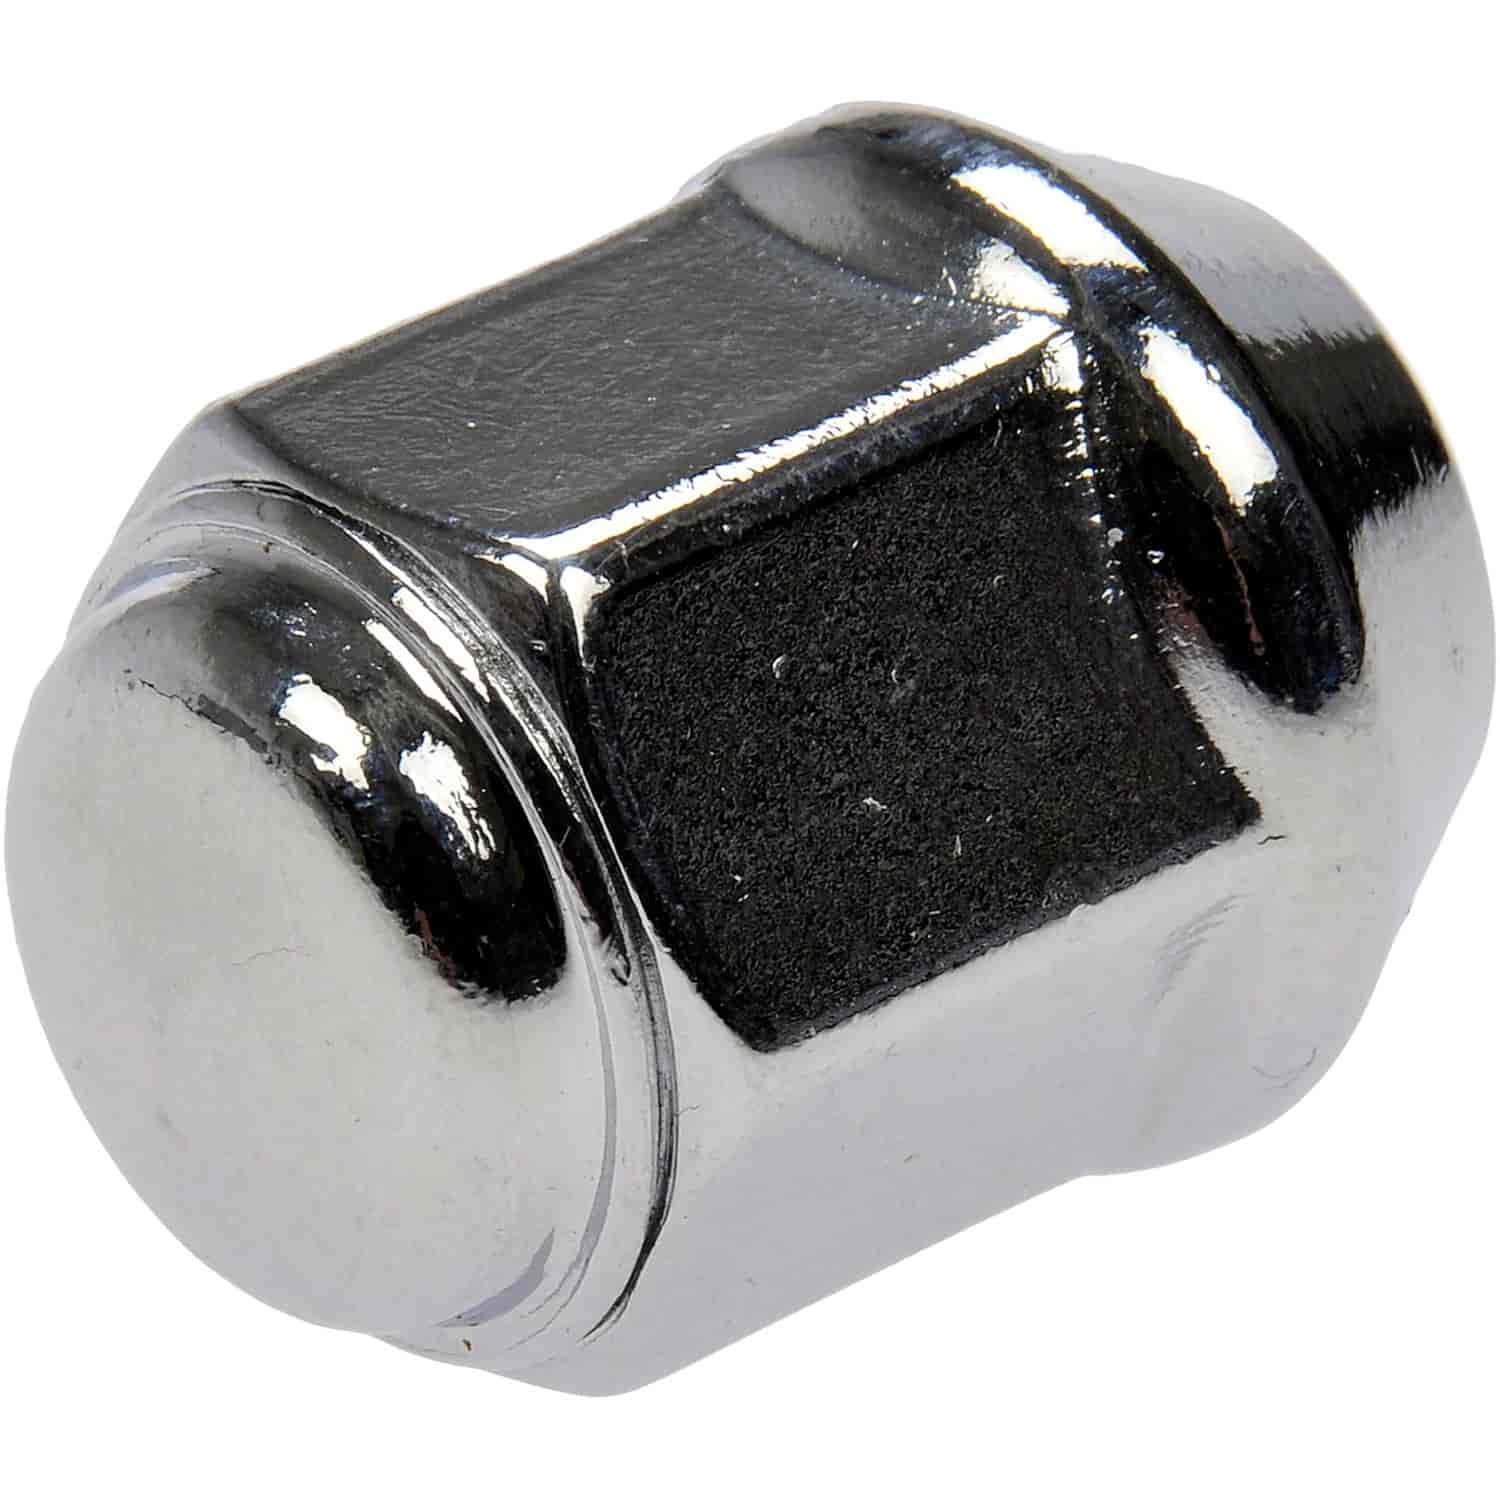 Wheel Nut 7/16-20 Dometop Capped - 3/4 In. Hex 1.375 In. Length